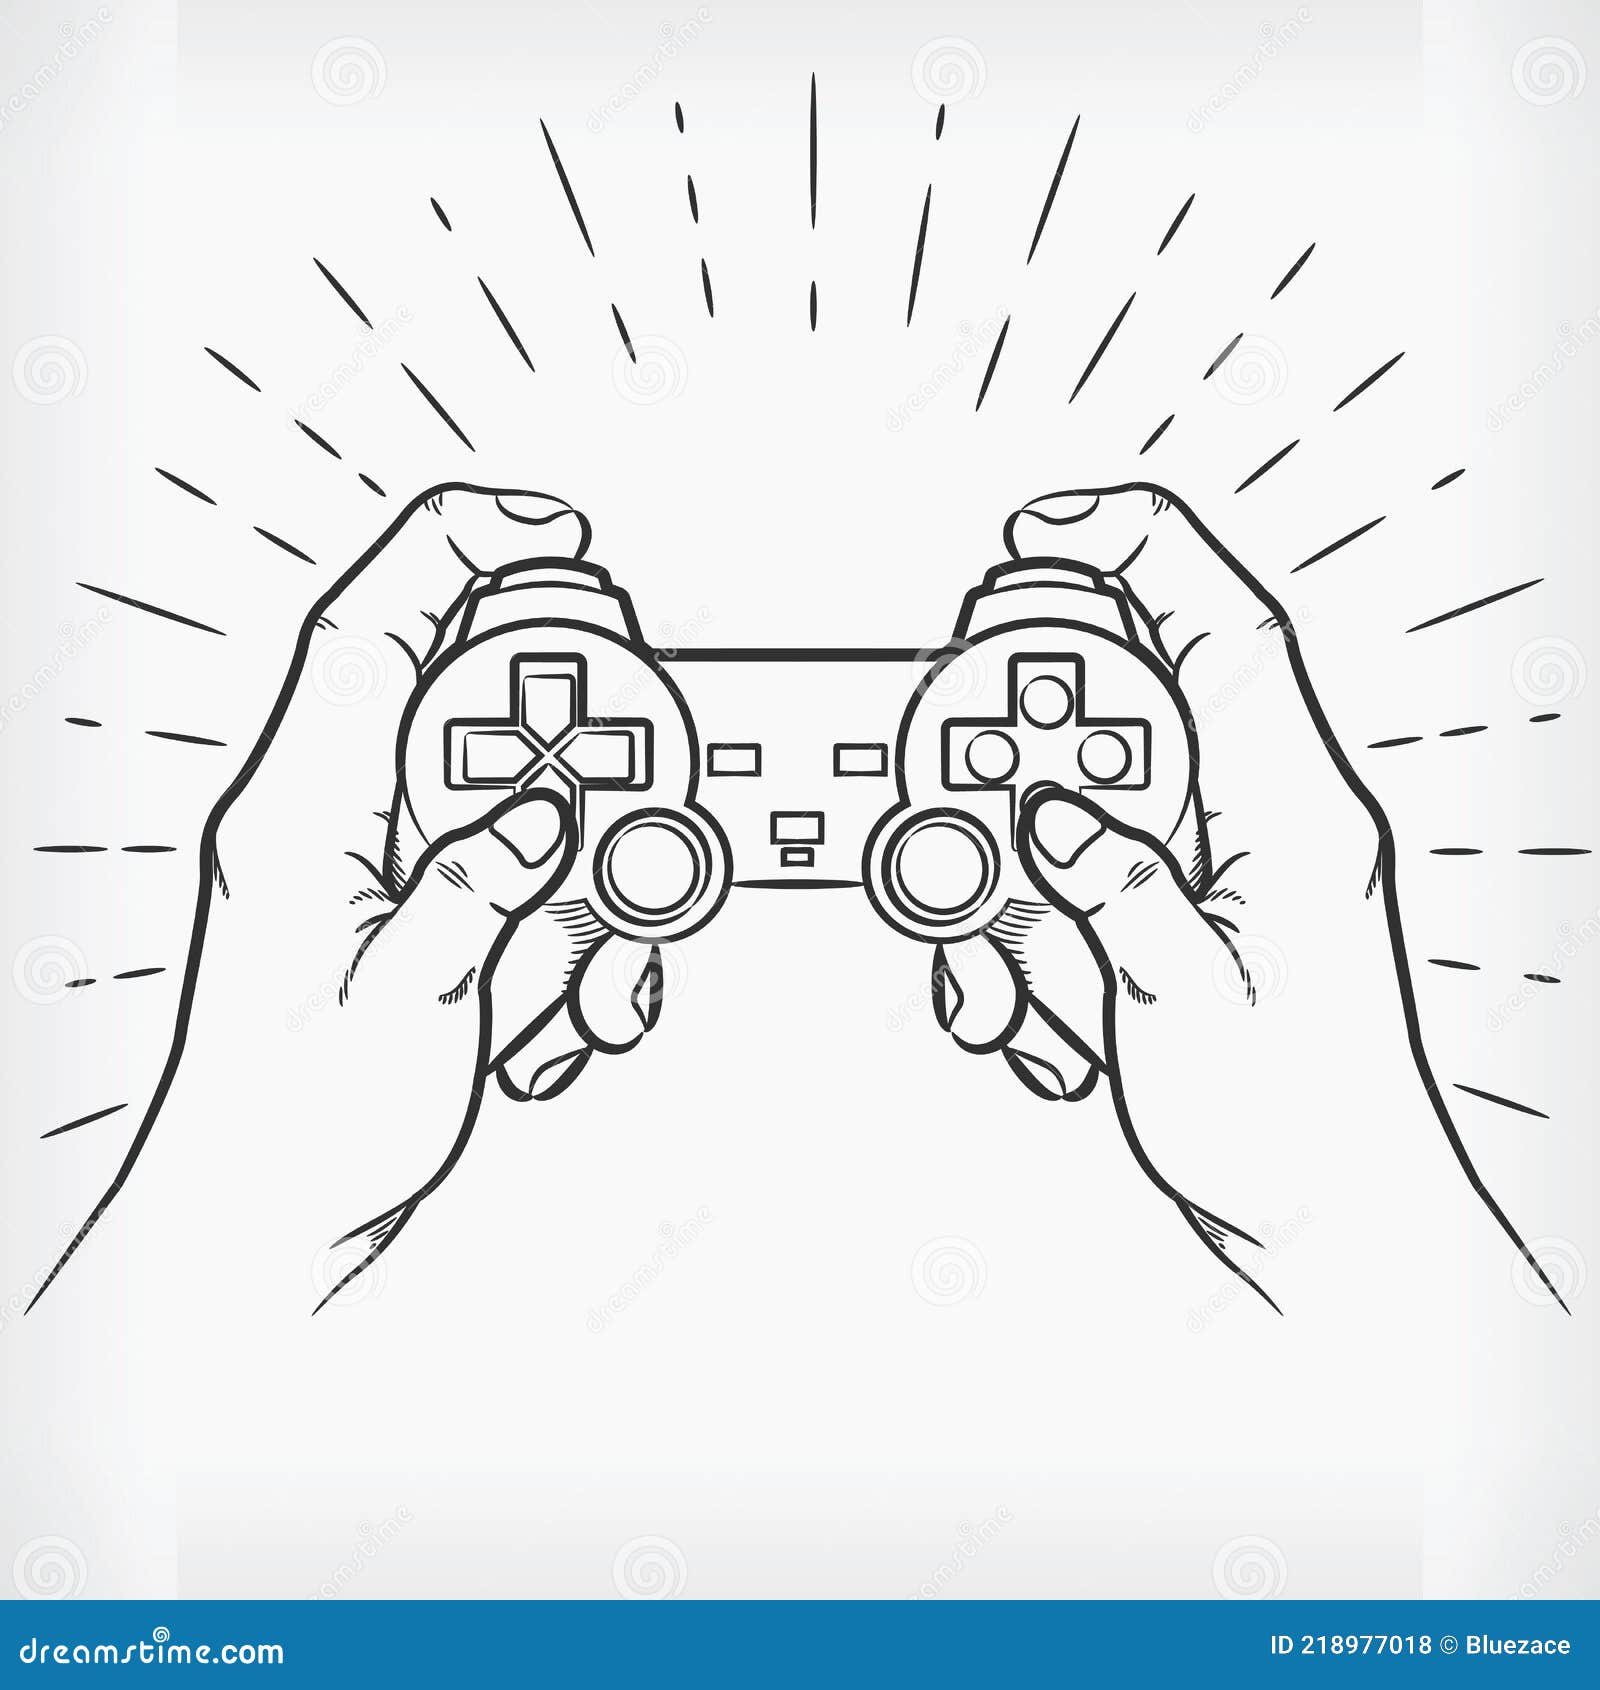 Game Doodles. Hand Drawing of Game Stock Vector - Illustration of